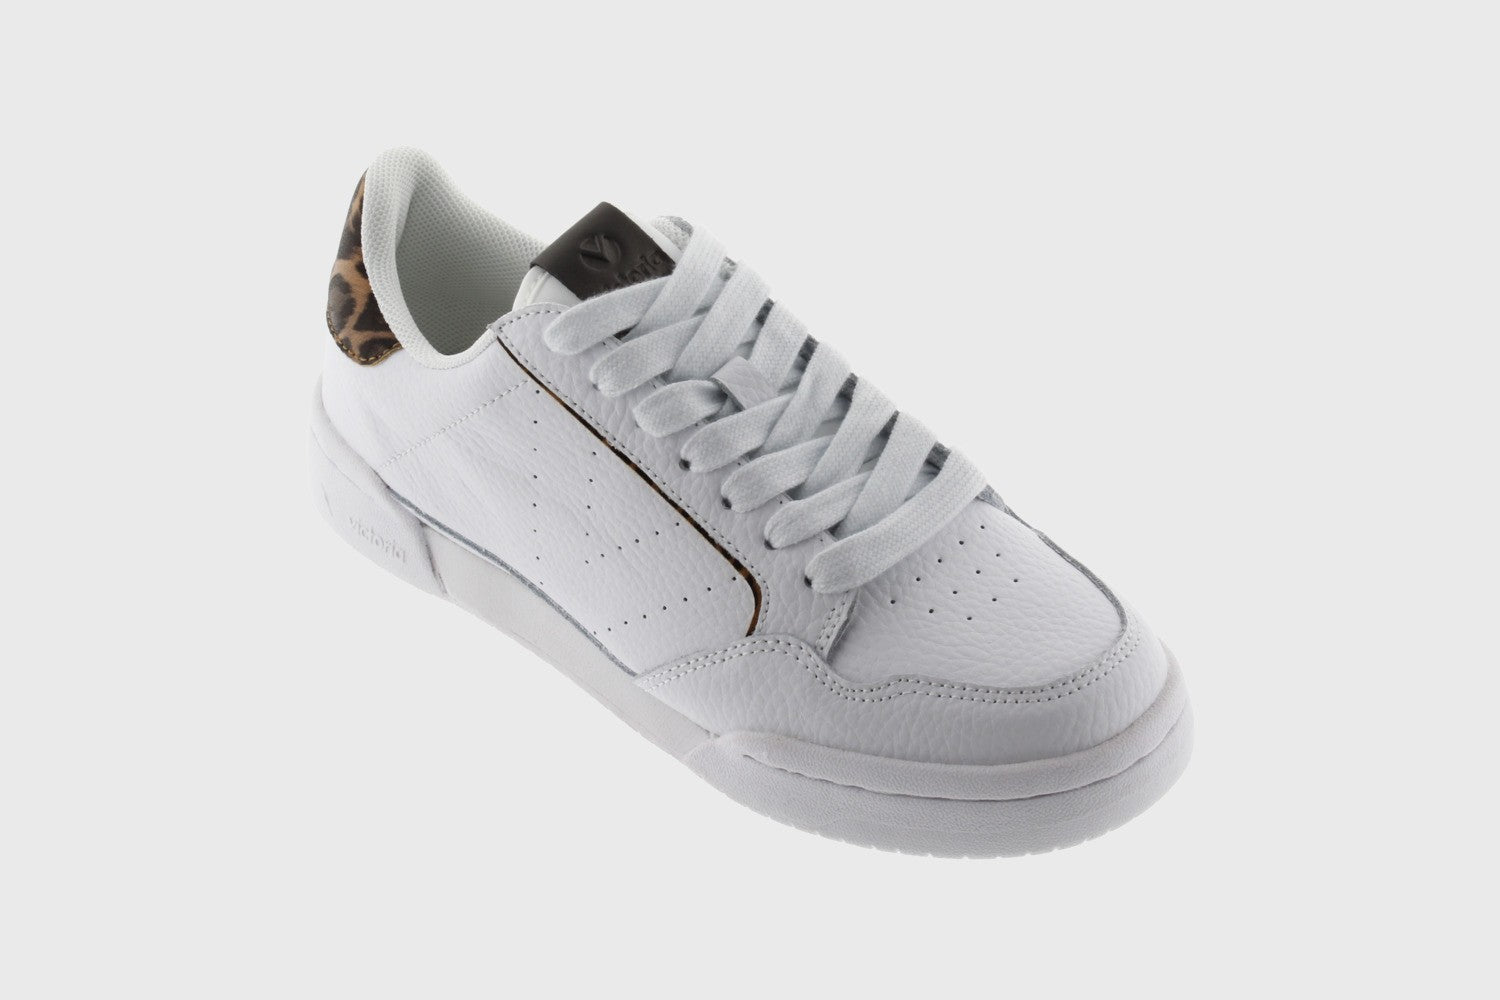 ladies white trainers with animal print